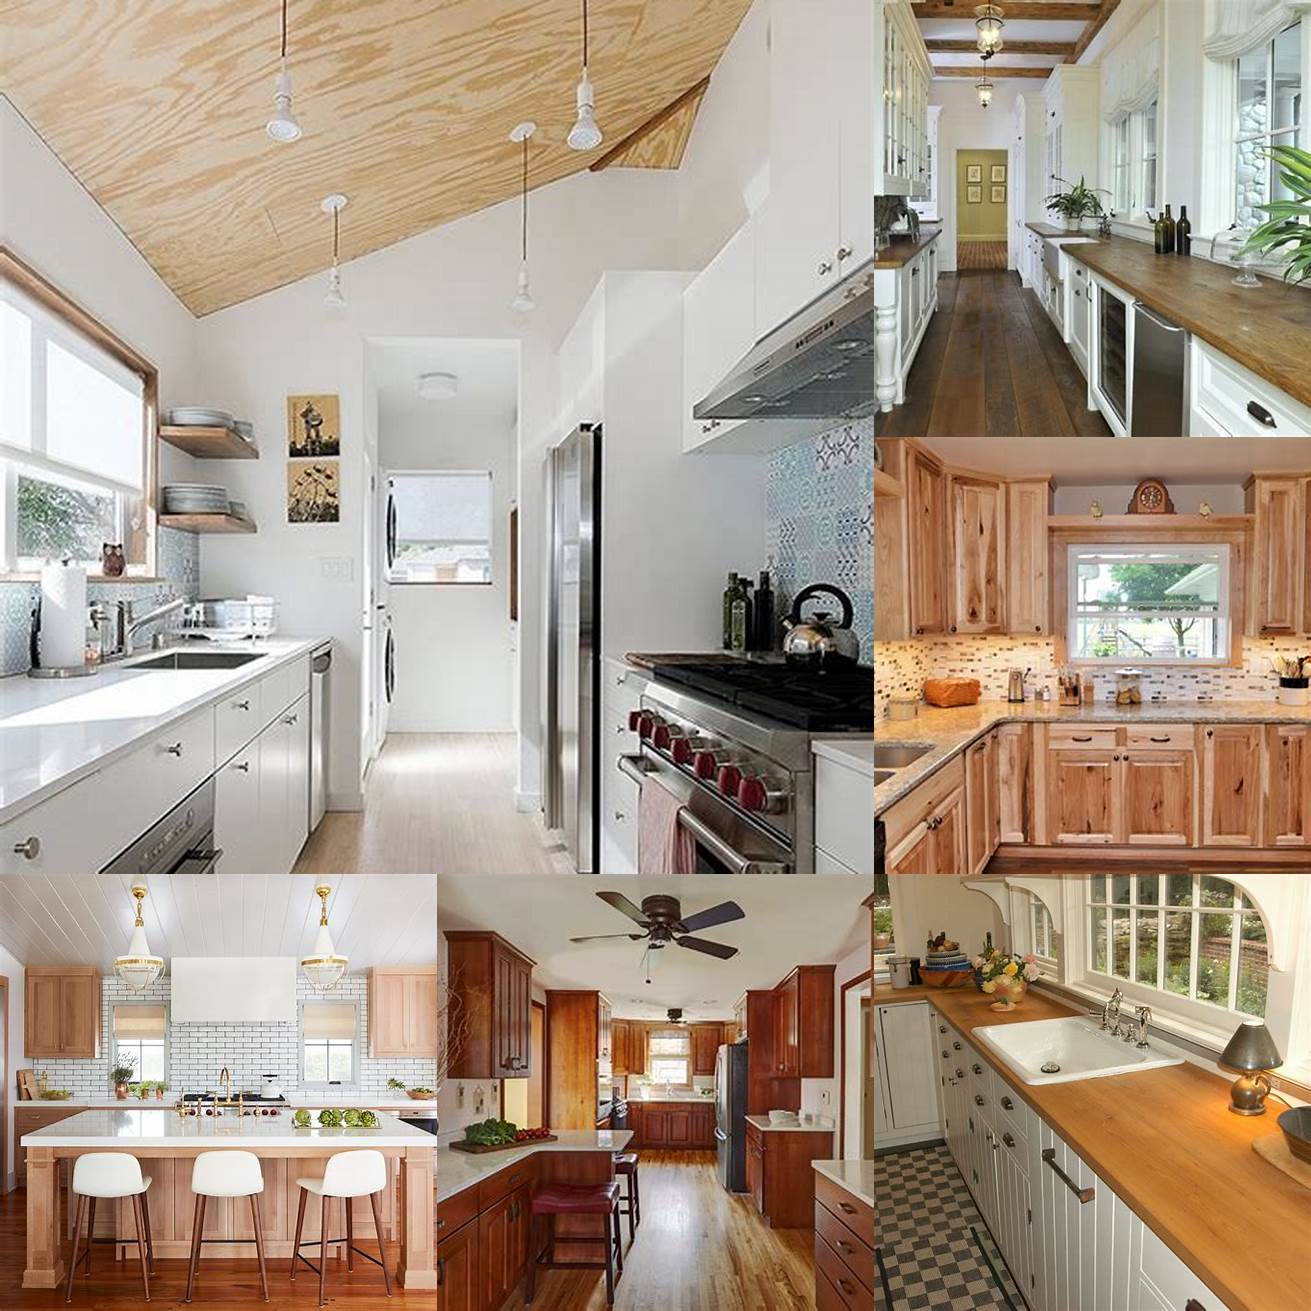 A galley kitchen with wood countertops creates a warm and natural look